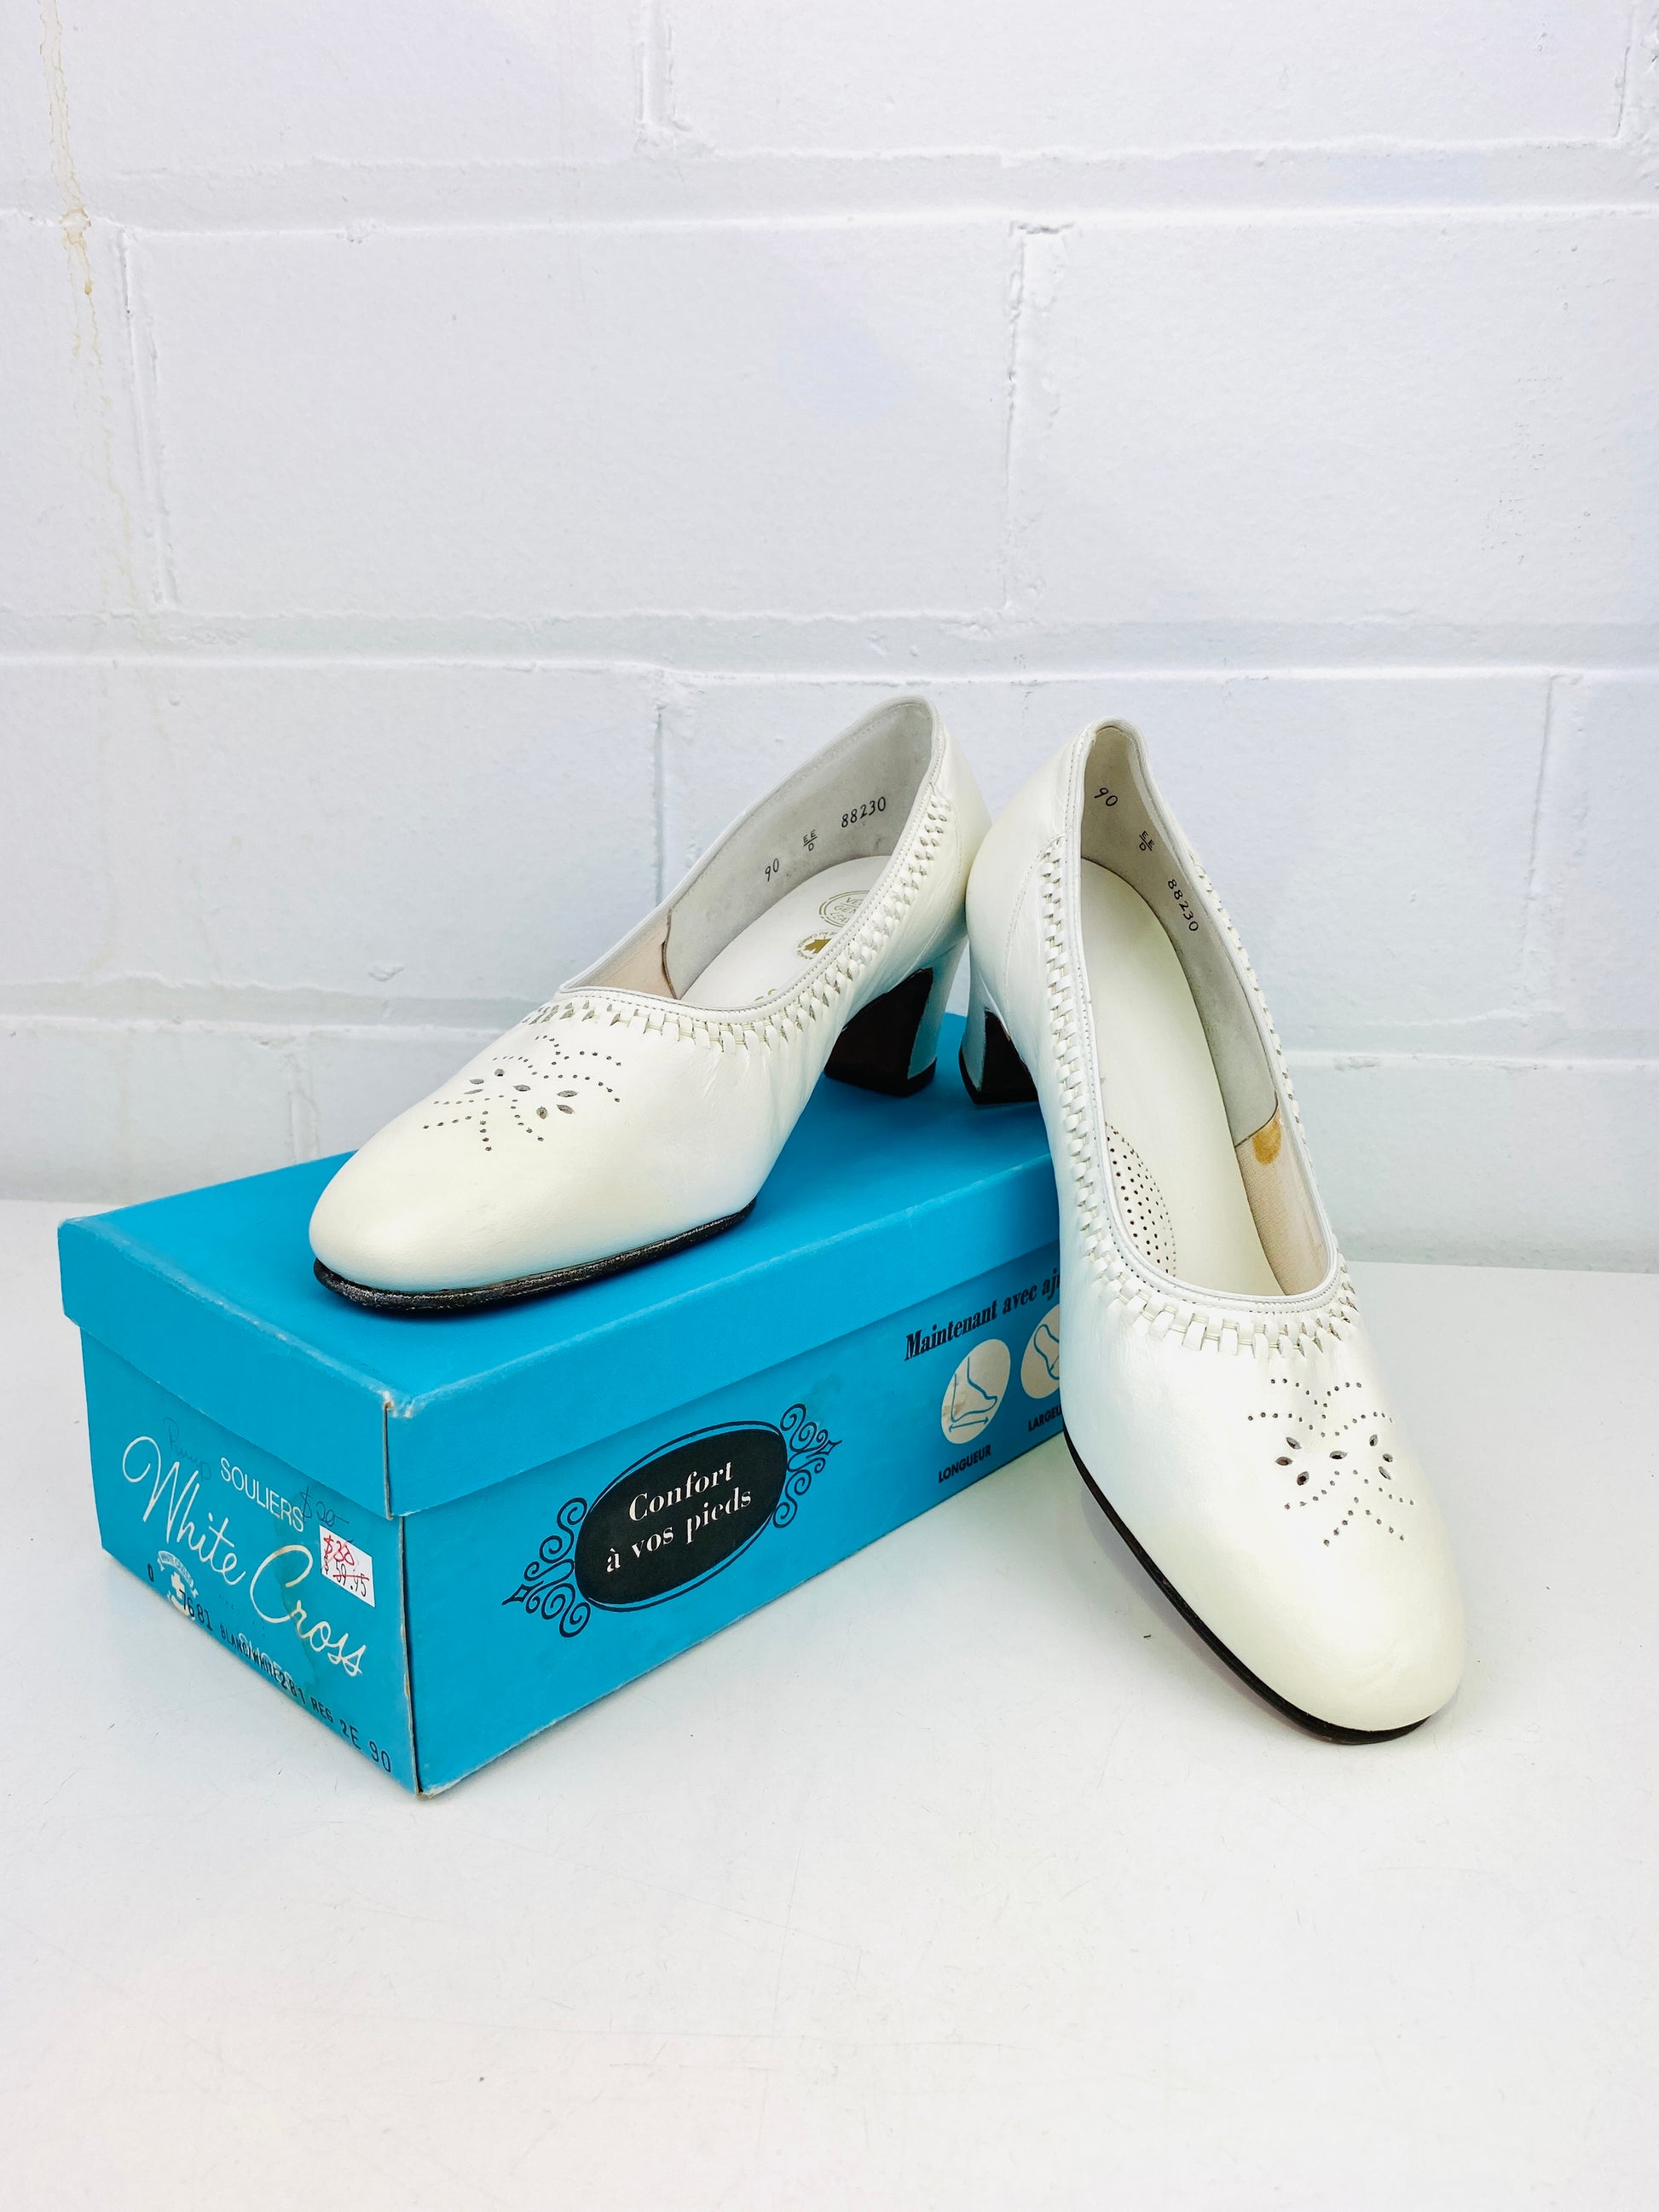 Vintage Deadstock Shoes, Women's 1980s White Leather Mid-Heel Pumps, NOS, 7681